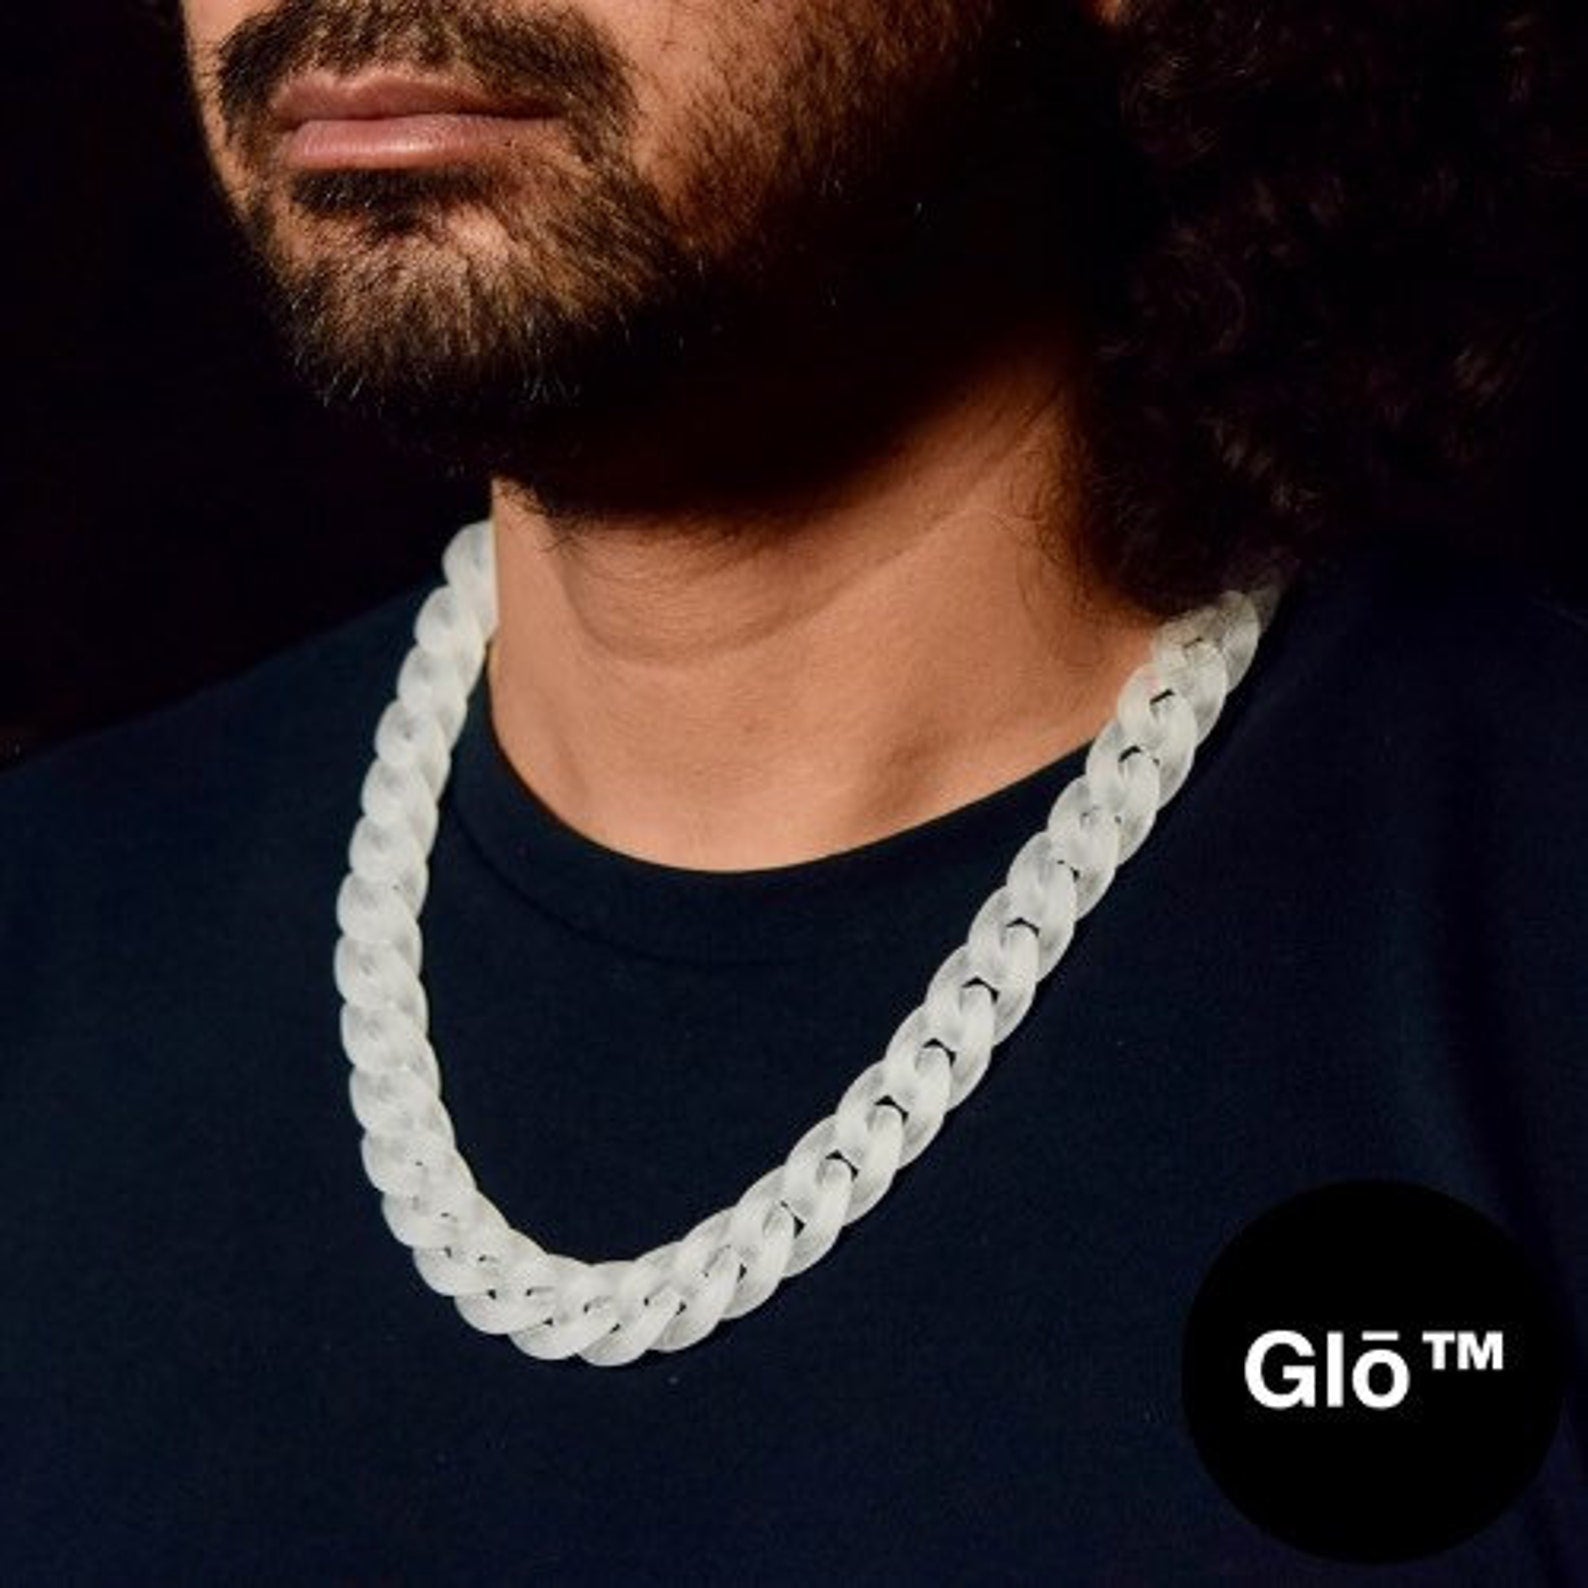 White Frosted Medium Cuban Link Necklace. Acrylic glass Chain - plushtrap_